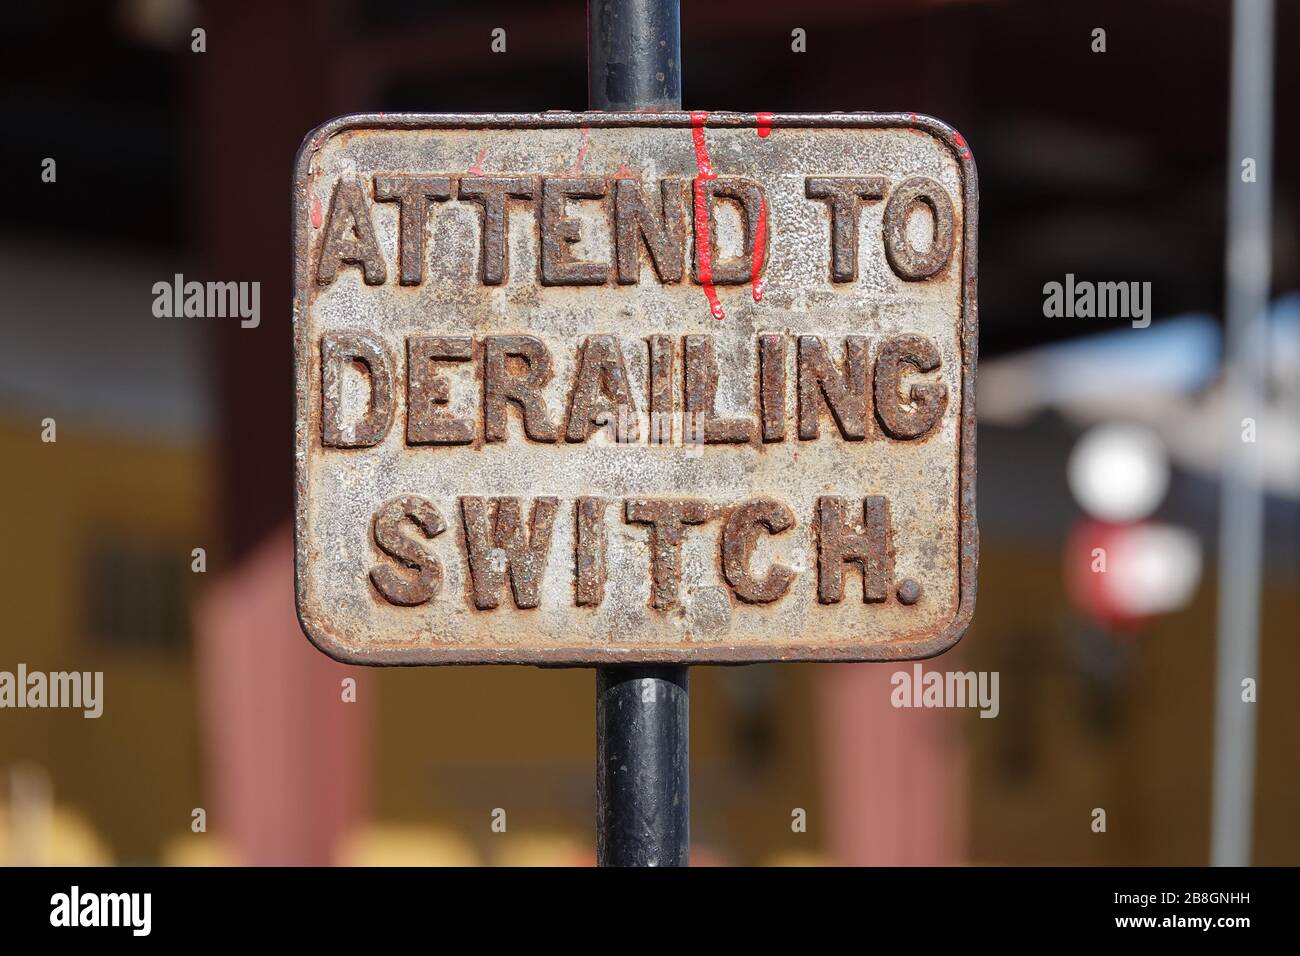 Attend to derailing switch Stock Photo